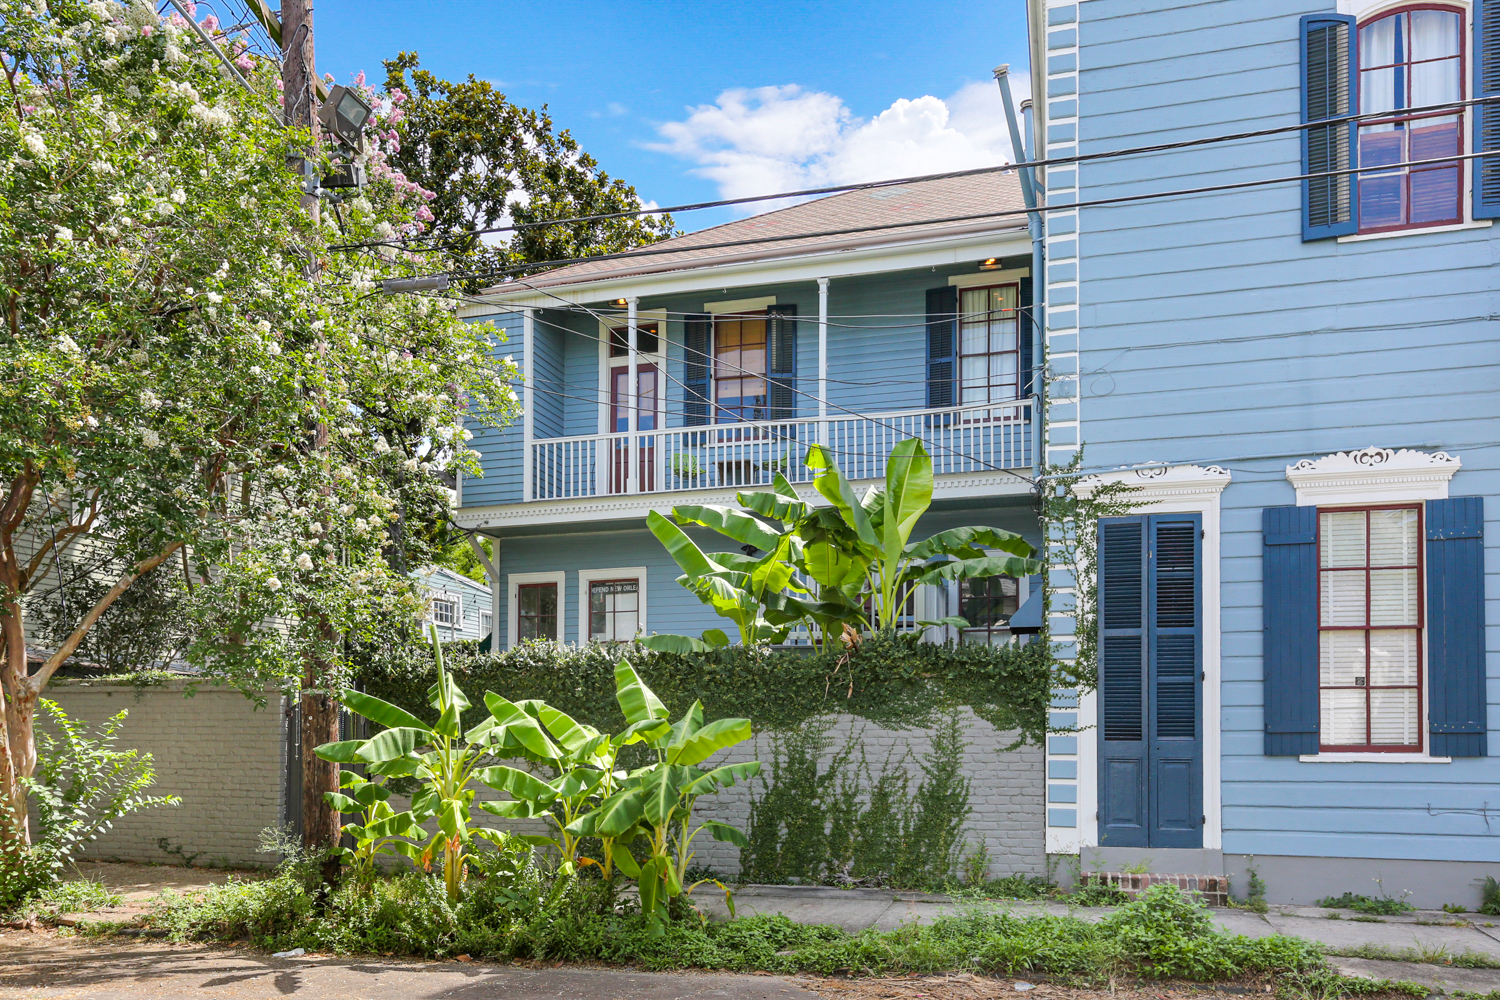  Garden District  4 beds, 2.5. Large and  spacious living room. High ceilings and hardwood floors throughout! Outside courtyard and deck. Steps away from Magazine St  with amazing restaurants and shops.